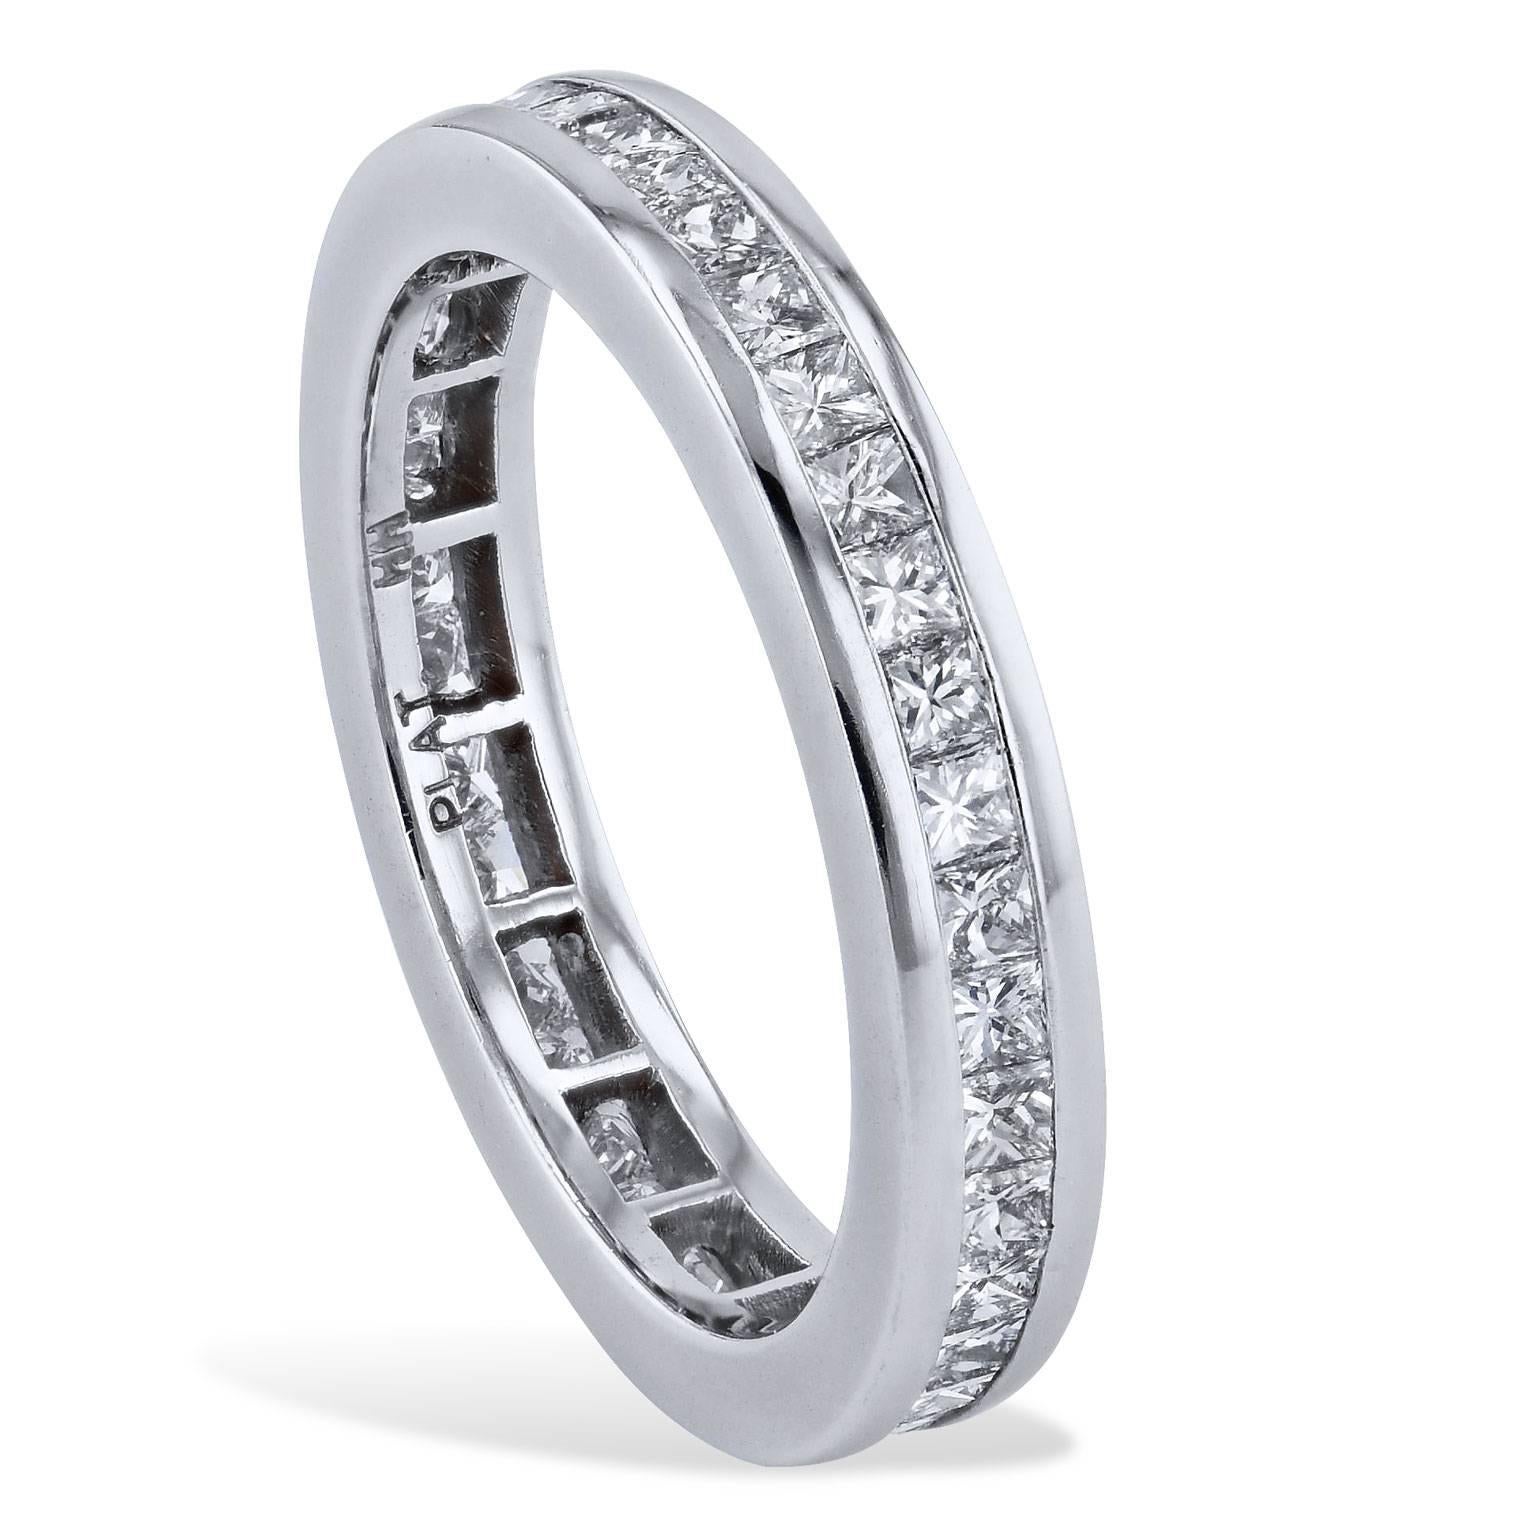 H&H 1.33 Carat Princess Cut Diamond Eternity Band Ring 7.25 In New Condition For Sale In Miami, FL